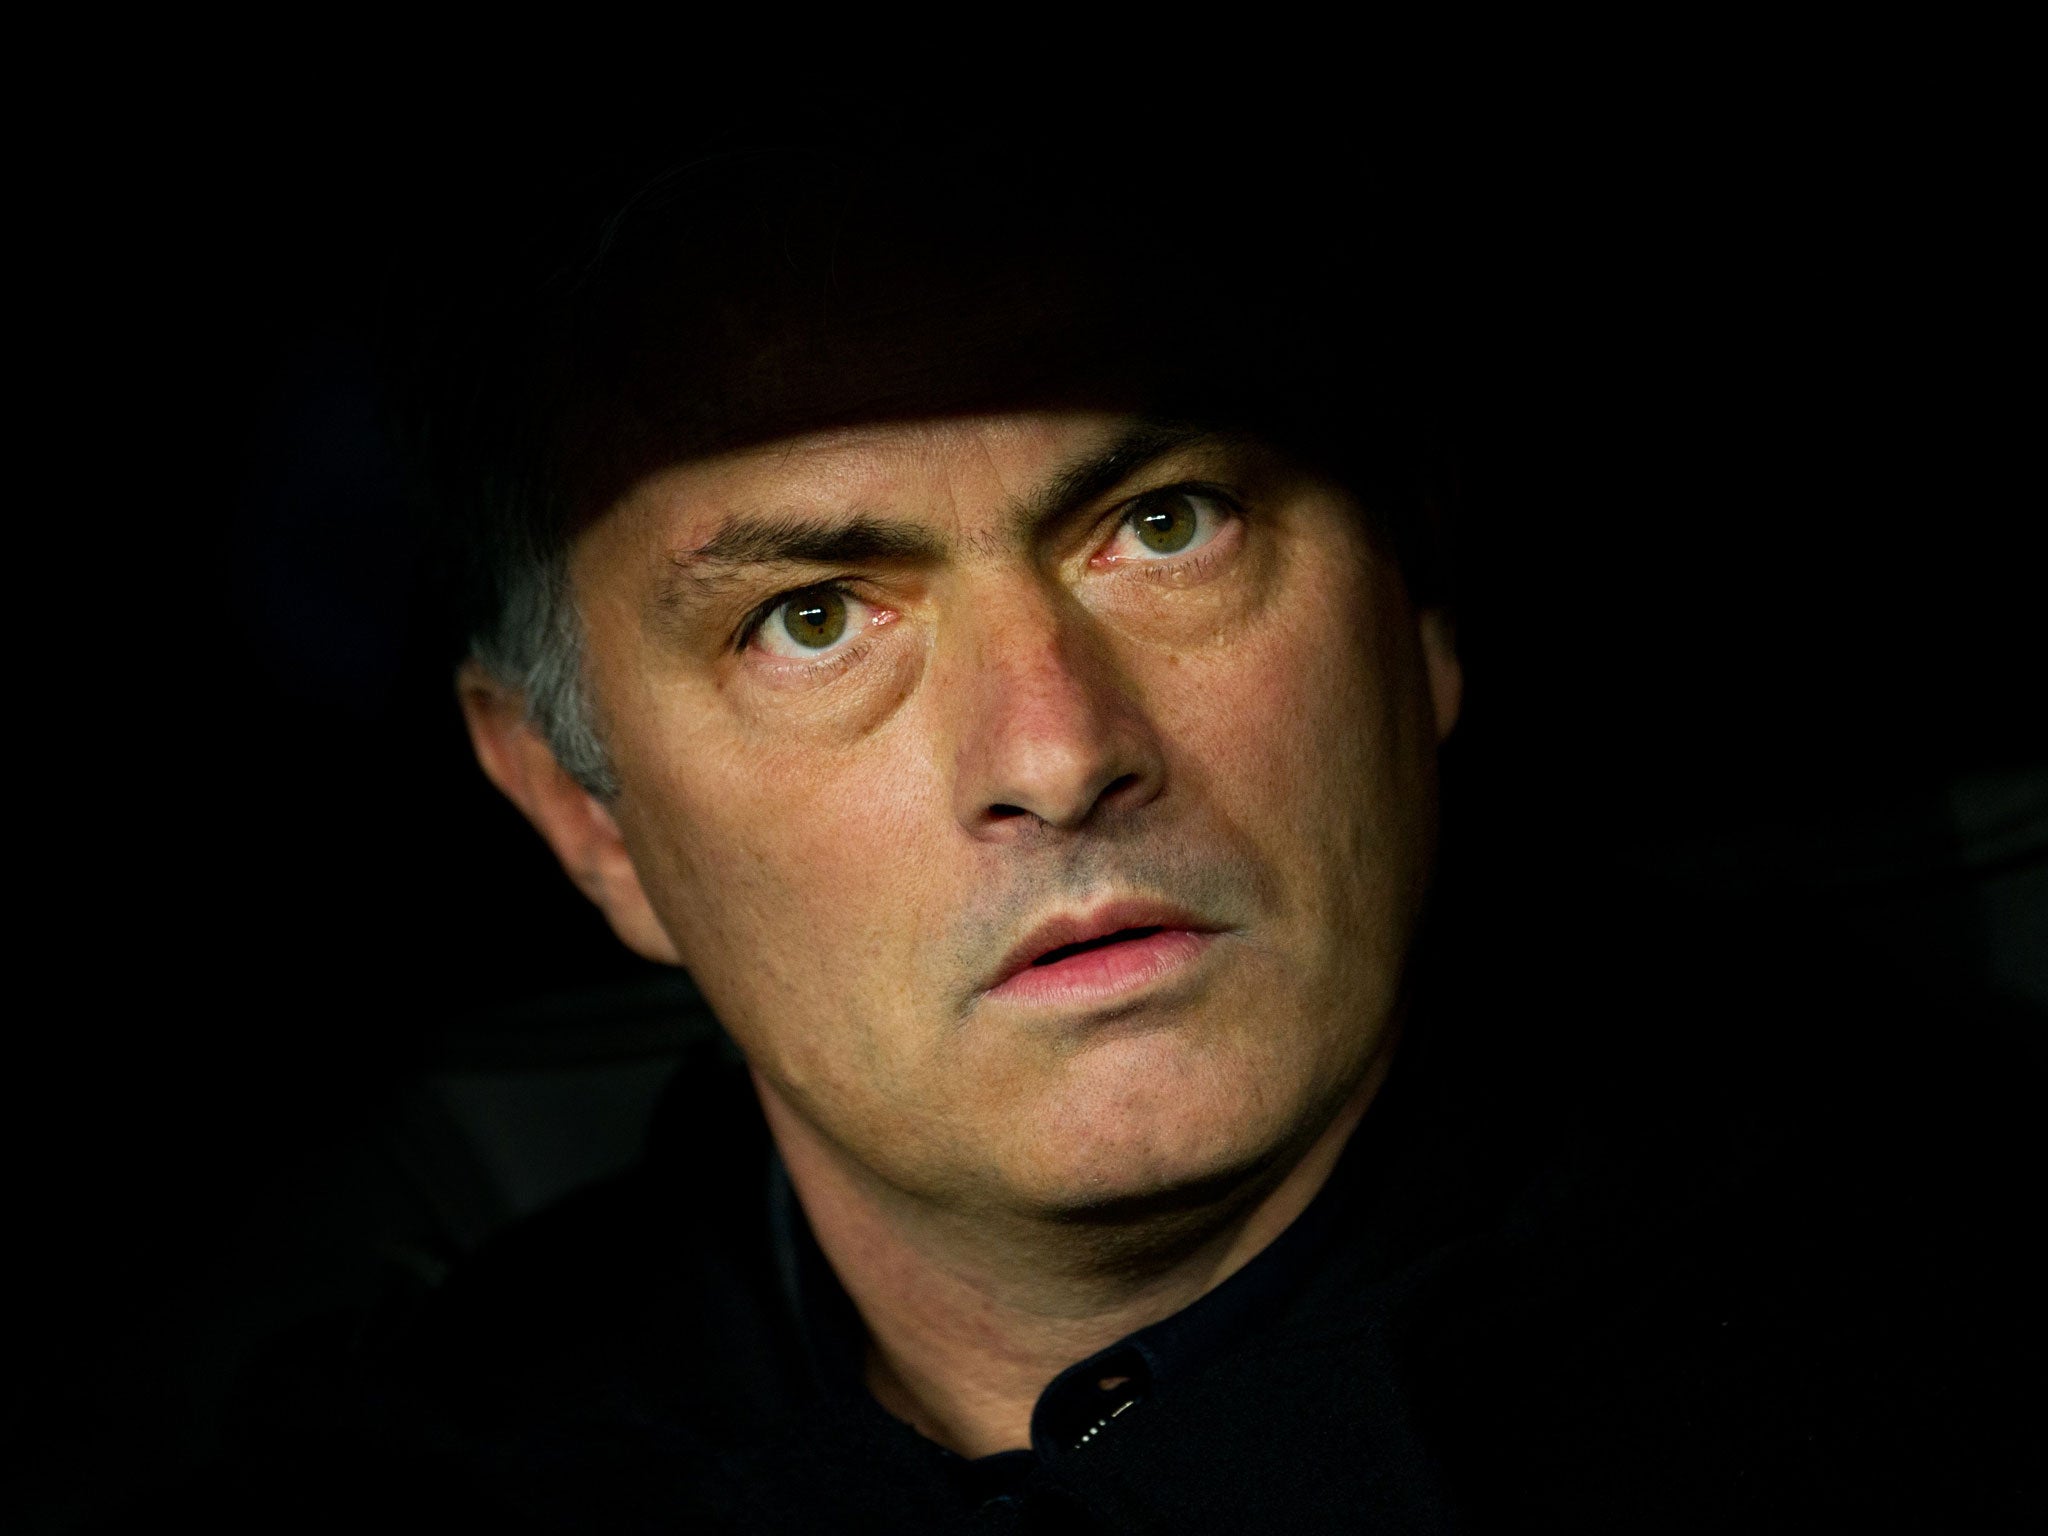 Blue horizon: Chelsea remains Mourinho’s most likely destination if he leaves Real Madrid